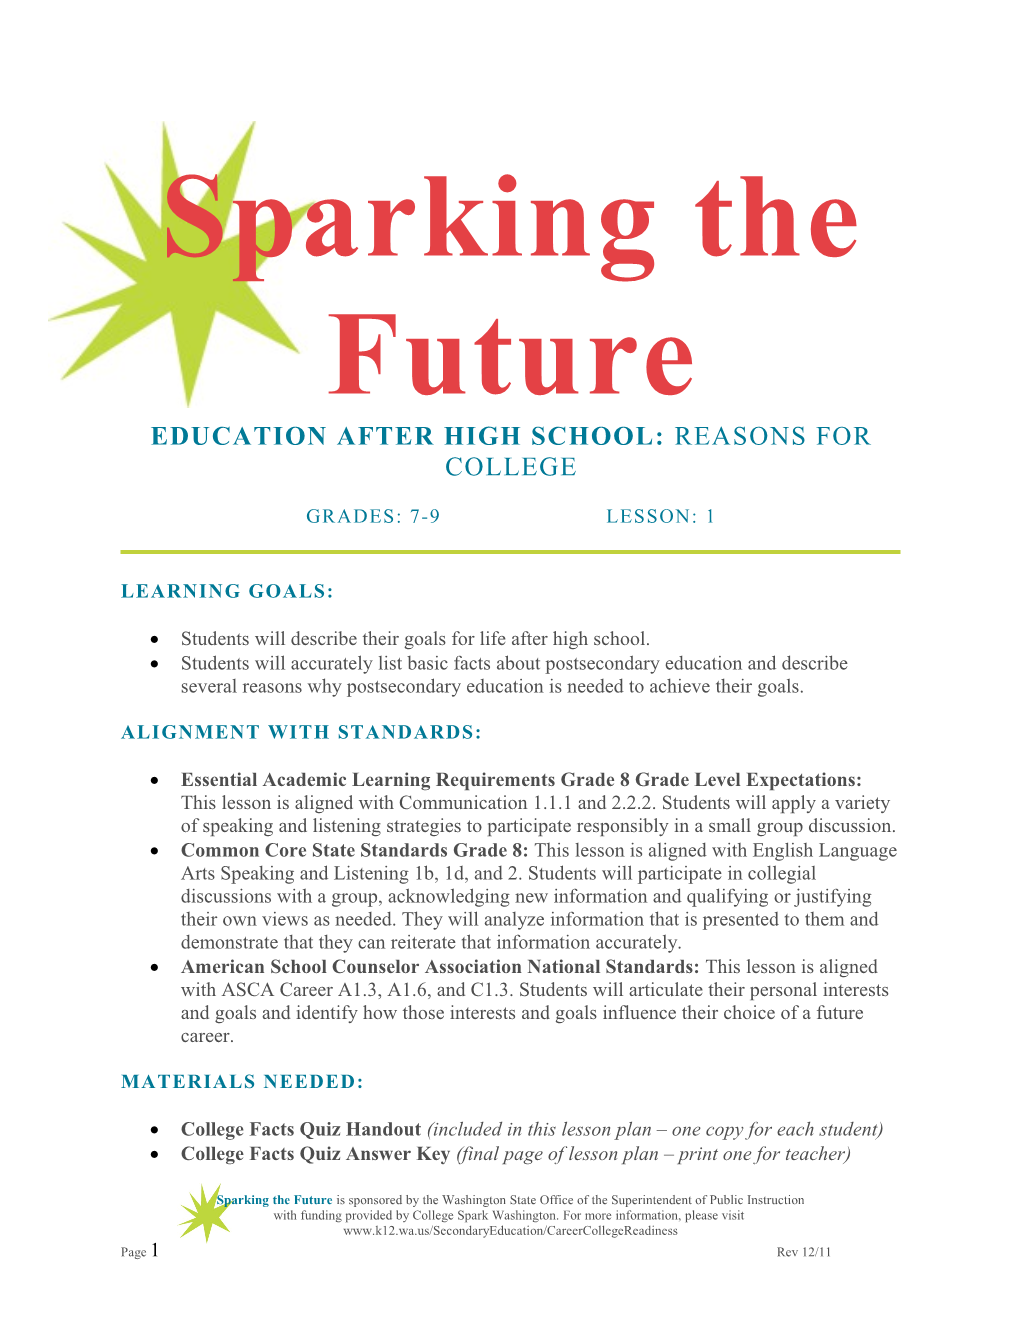 Sparking the Future Grades 7-9 Lesson 1 Reasons for College